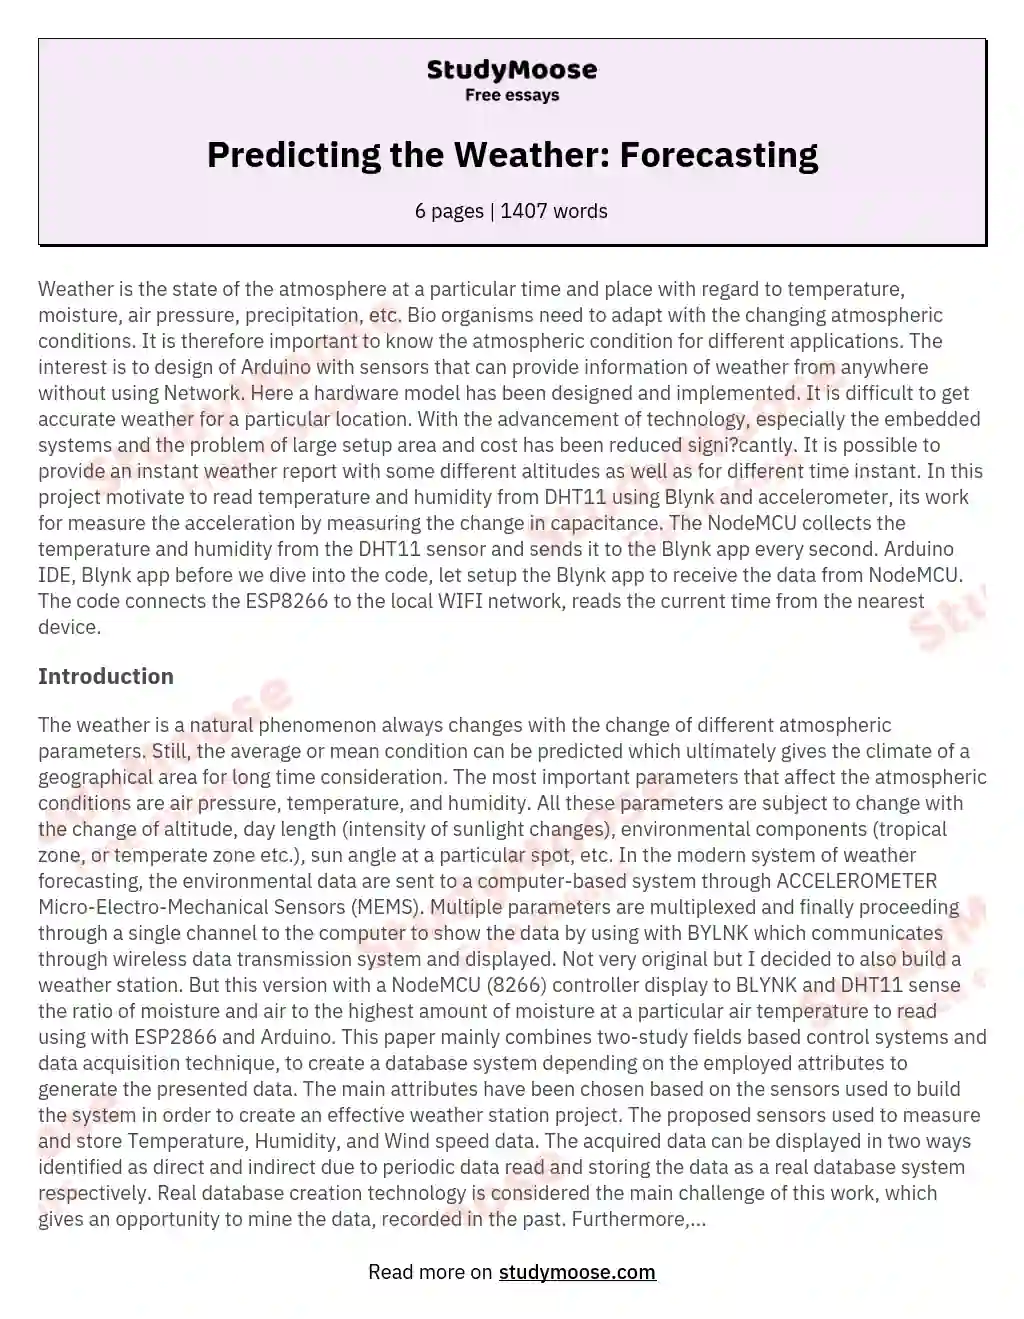 Predicting the Weather: Forecasting